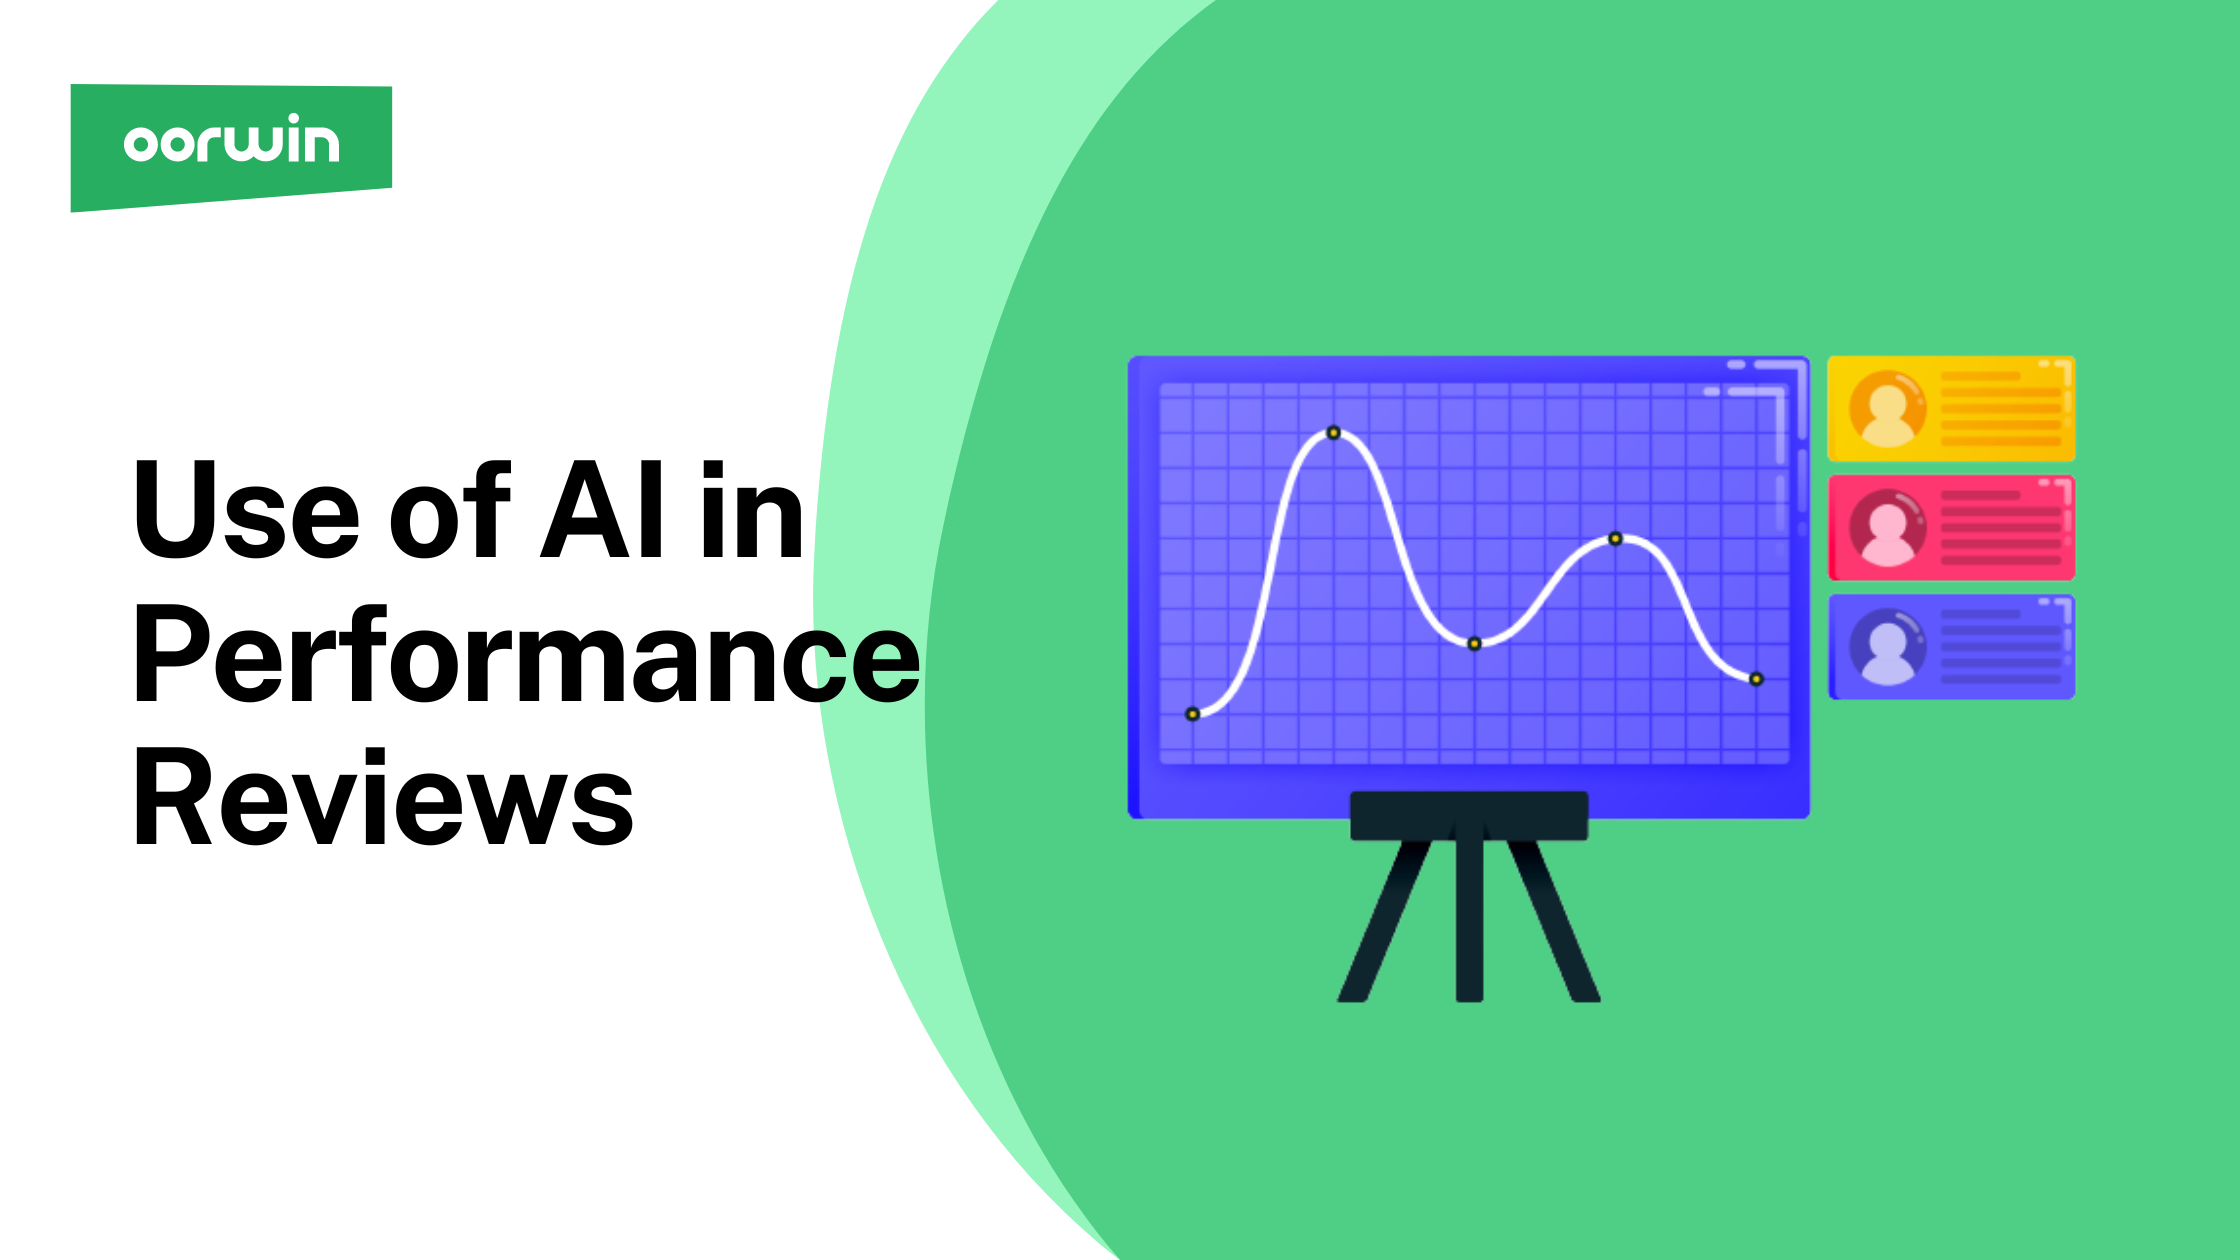 Use of AI in Performance Reviews | Oorwin